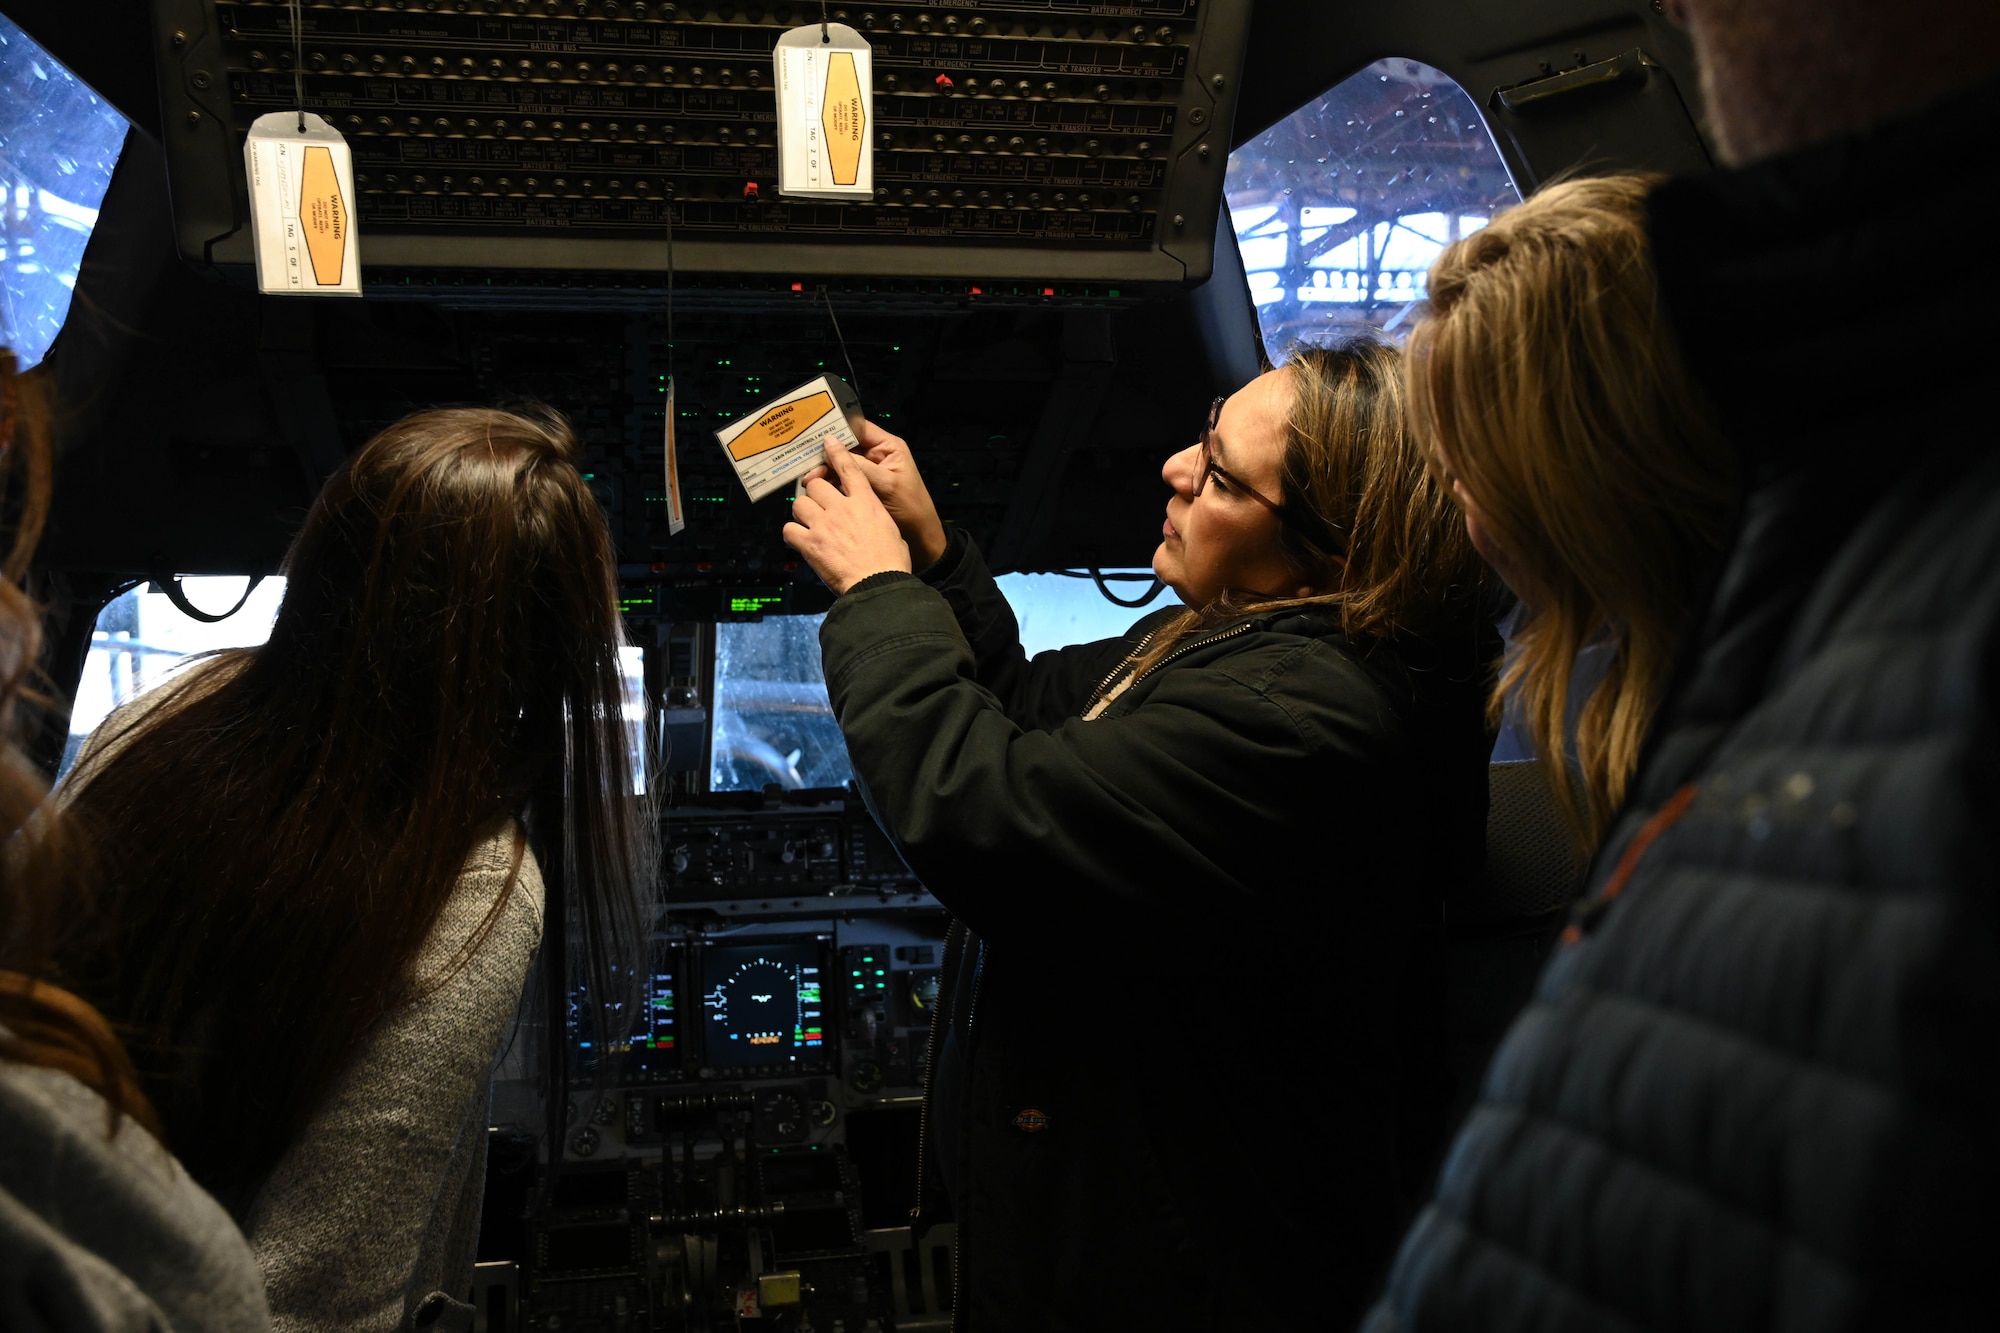 Joanna Malloy, 97th Aircraft Maintenance Squadron aircraft mechanic, shows warning tags on the panel of a C-17 Globemaster III to Altus Military Affairs Committee members during an orientation tour at Altus Air Force Base, Oklahoma, Nov. 2, 2023. Malloy explained the mechanisms of the control panel and the purpose of the warning tags. (U.S. Air Force photo by Senior Airman Miyah Gray)